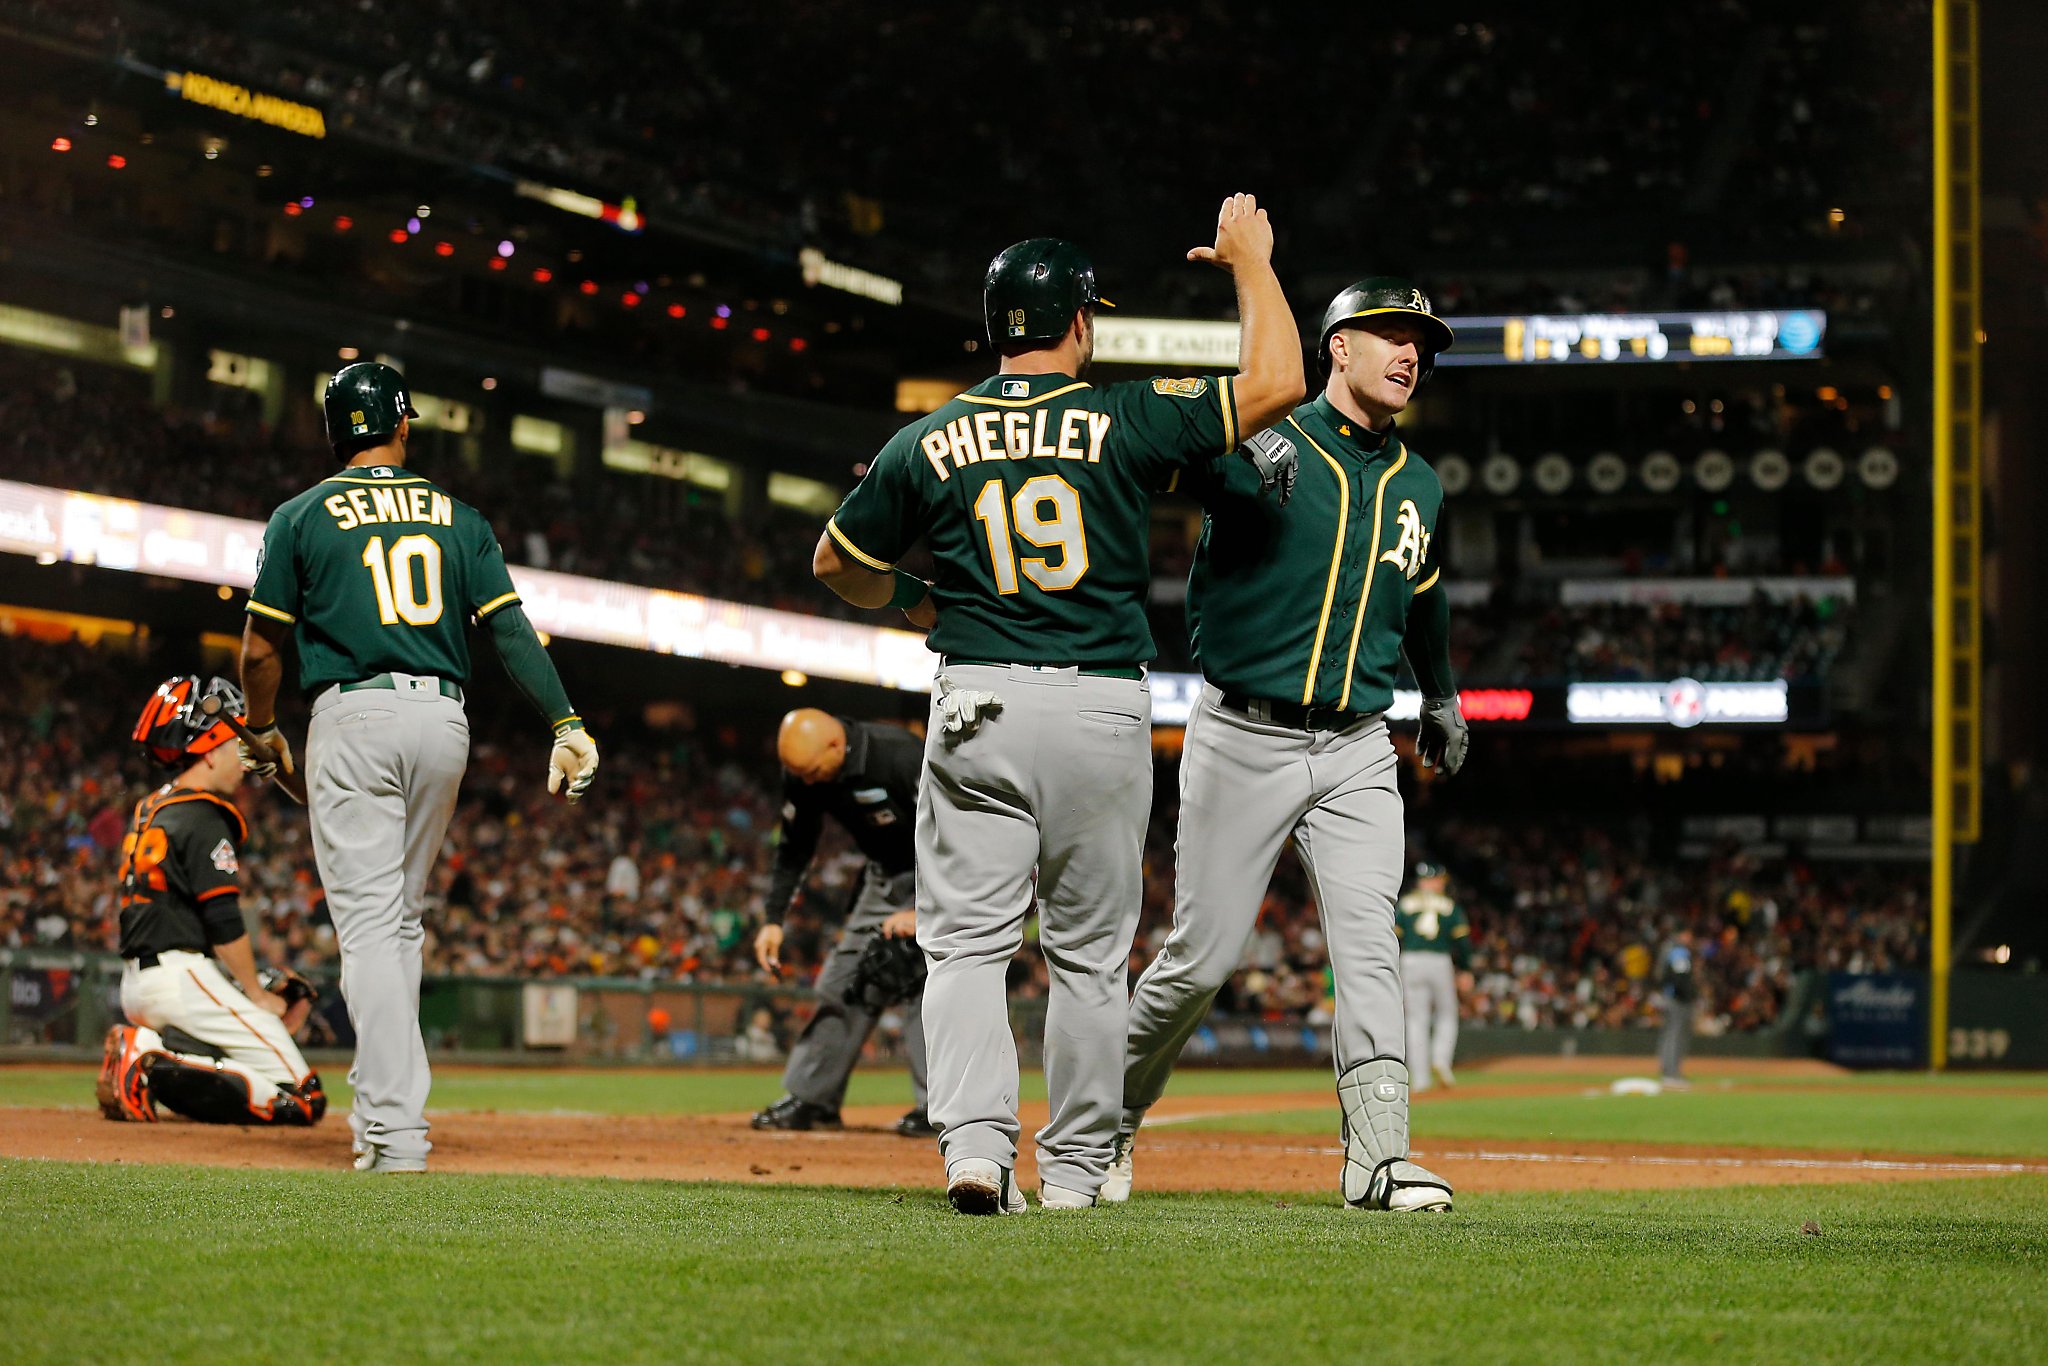 Mark Canha's pinch-hit home run lifts A's past Giants 4-3